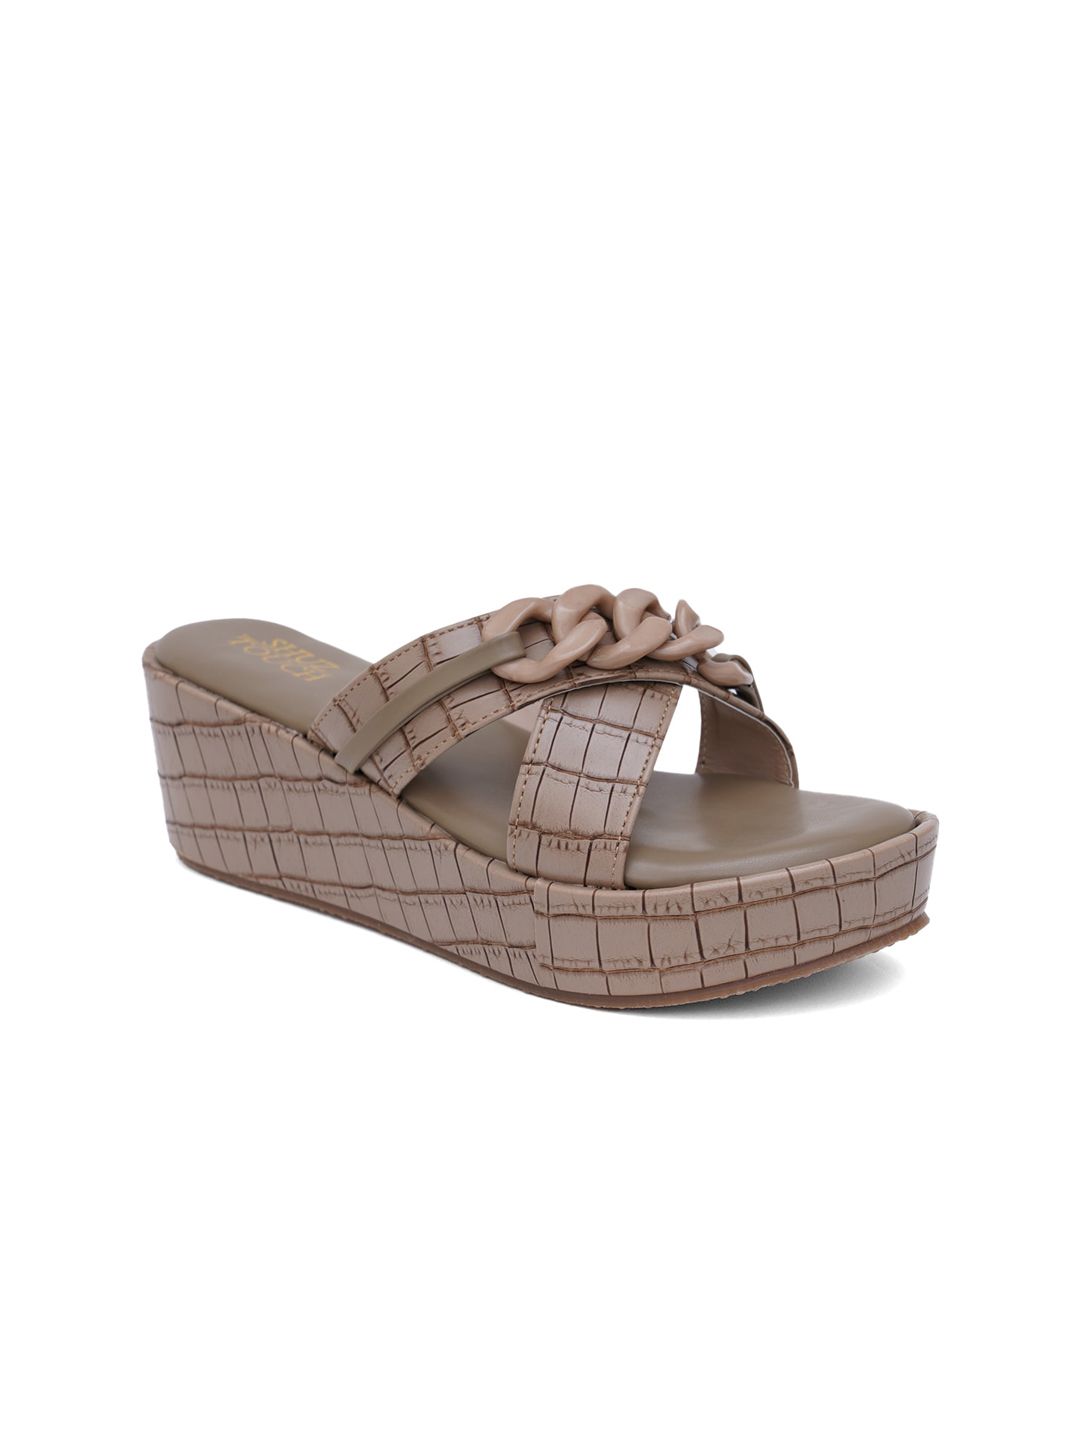 SHUZ TOUCH Camel Brown Flatform Sandals Price in India